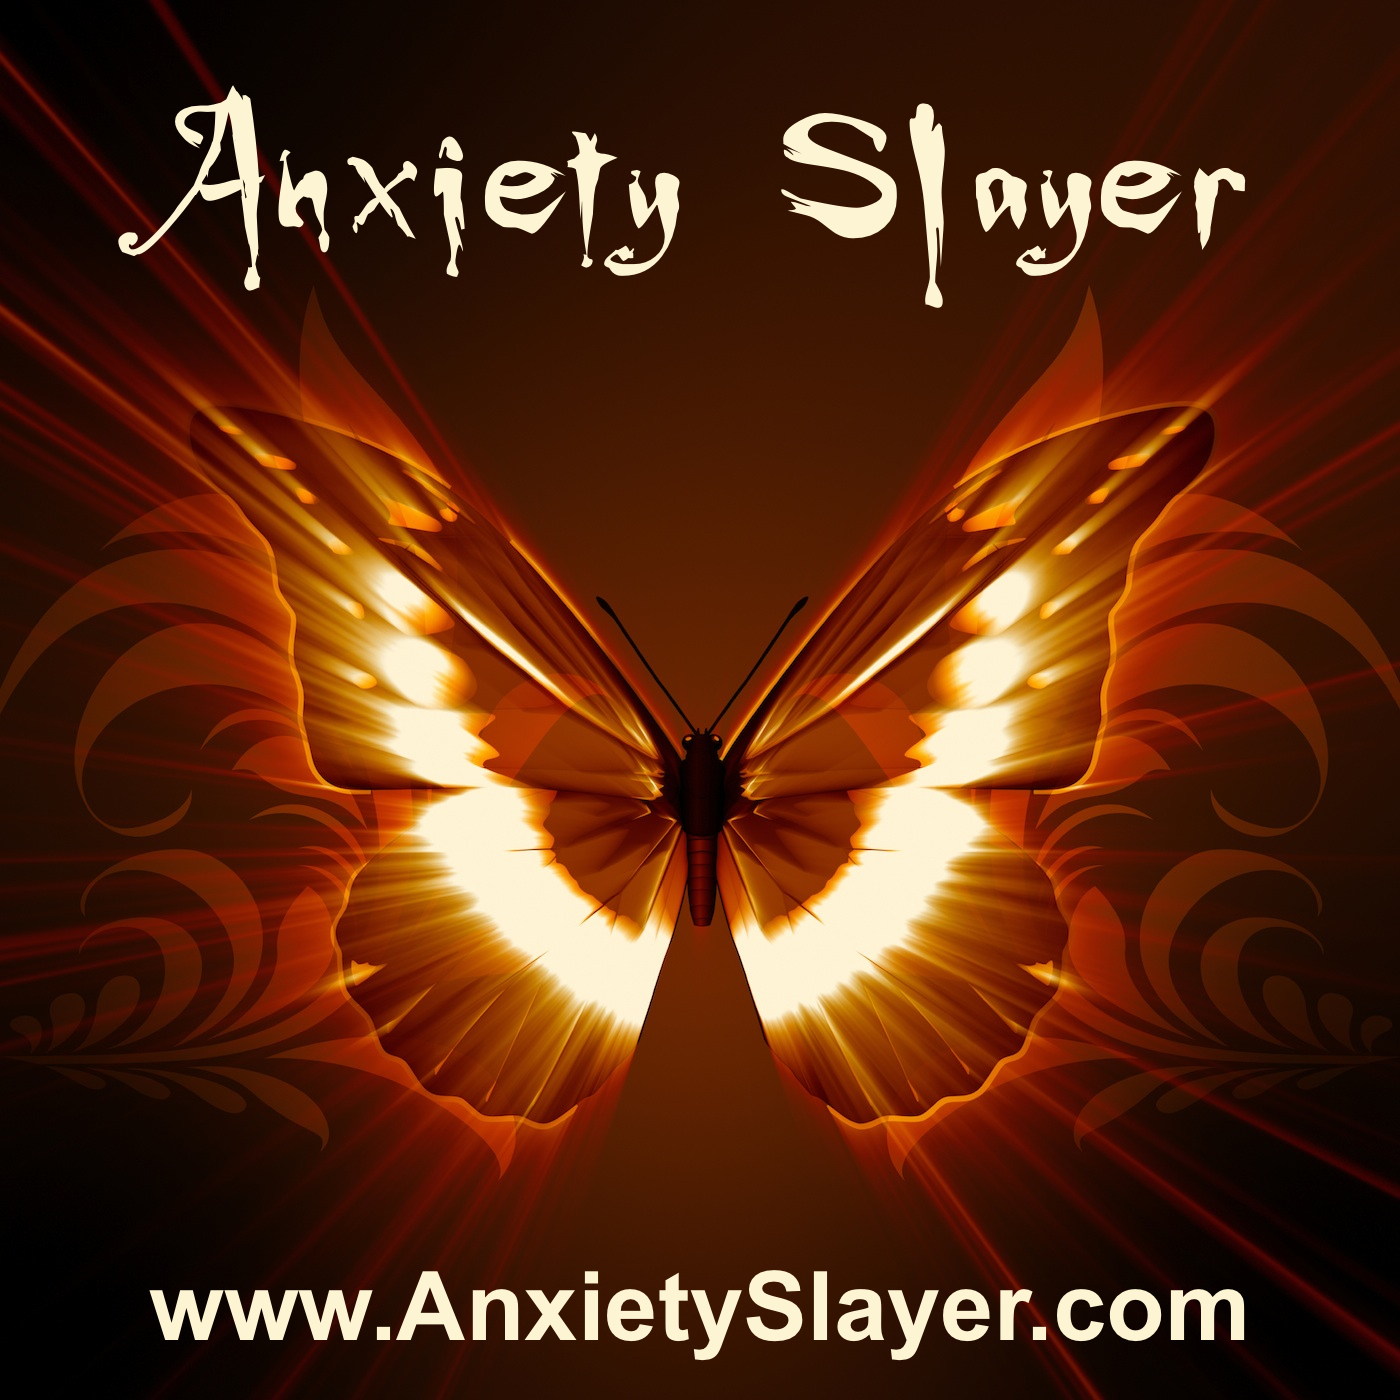 Anxiety Slayer Received an Award from Psych Central